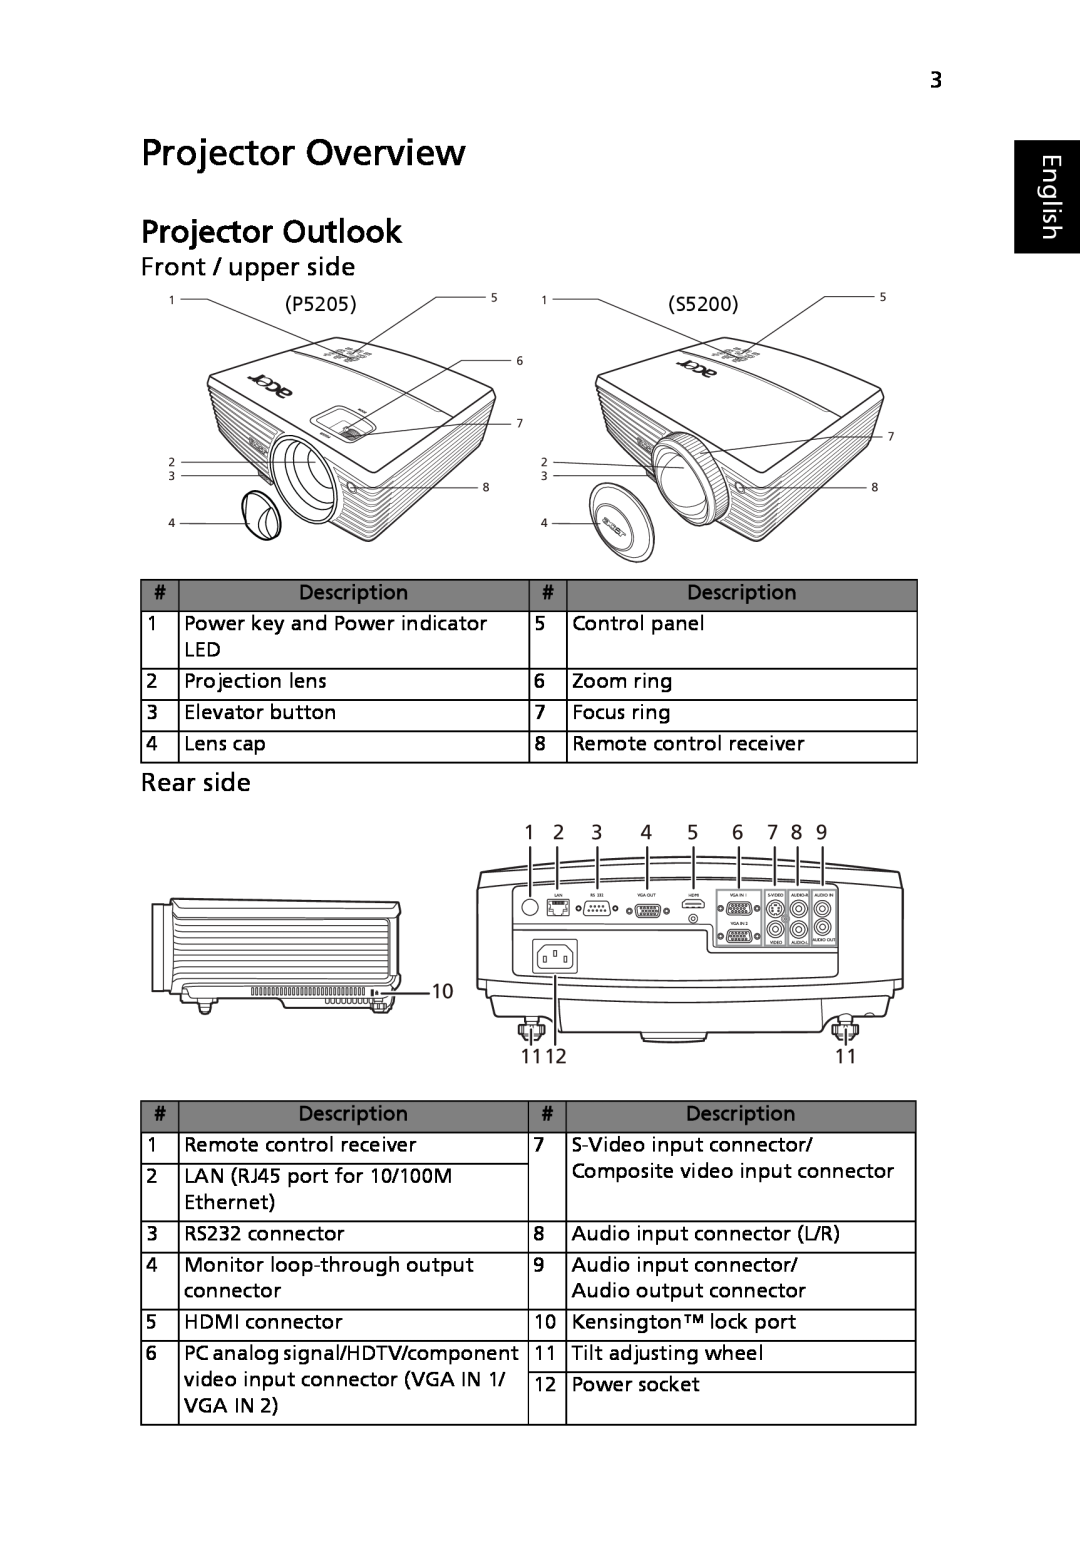 Acer P5205 manual Projector Overview, Projector Outlook, Front / upper side, Rear side, English 